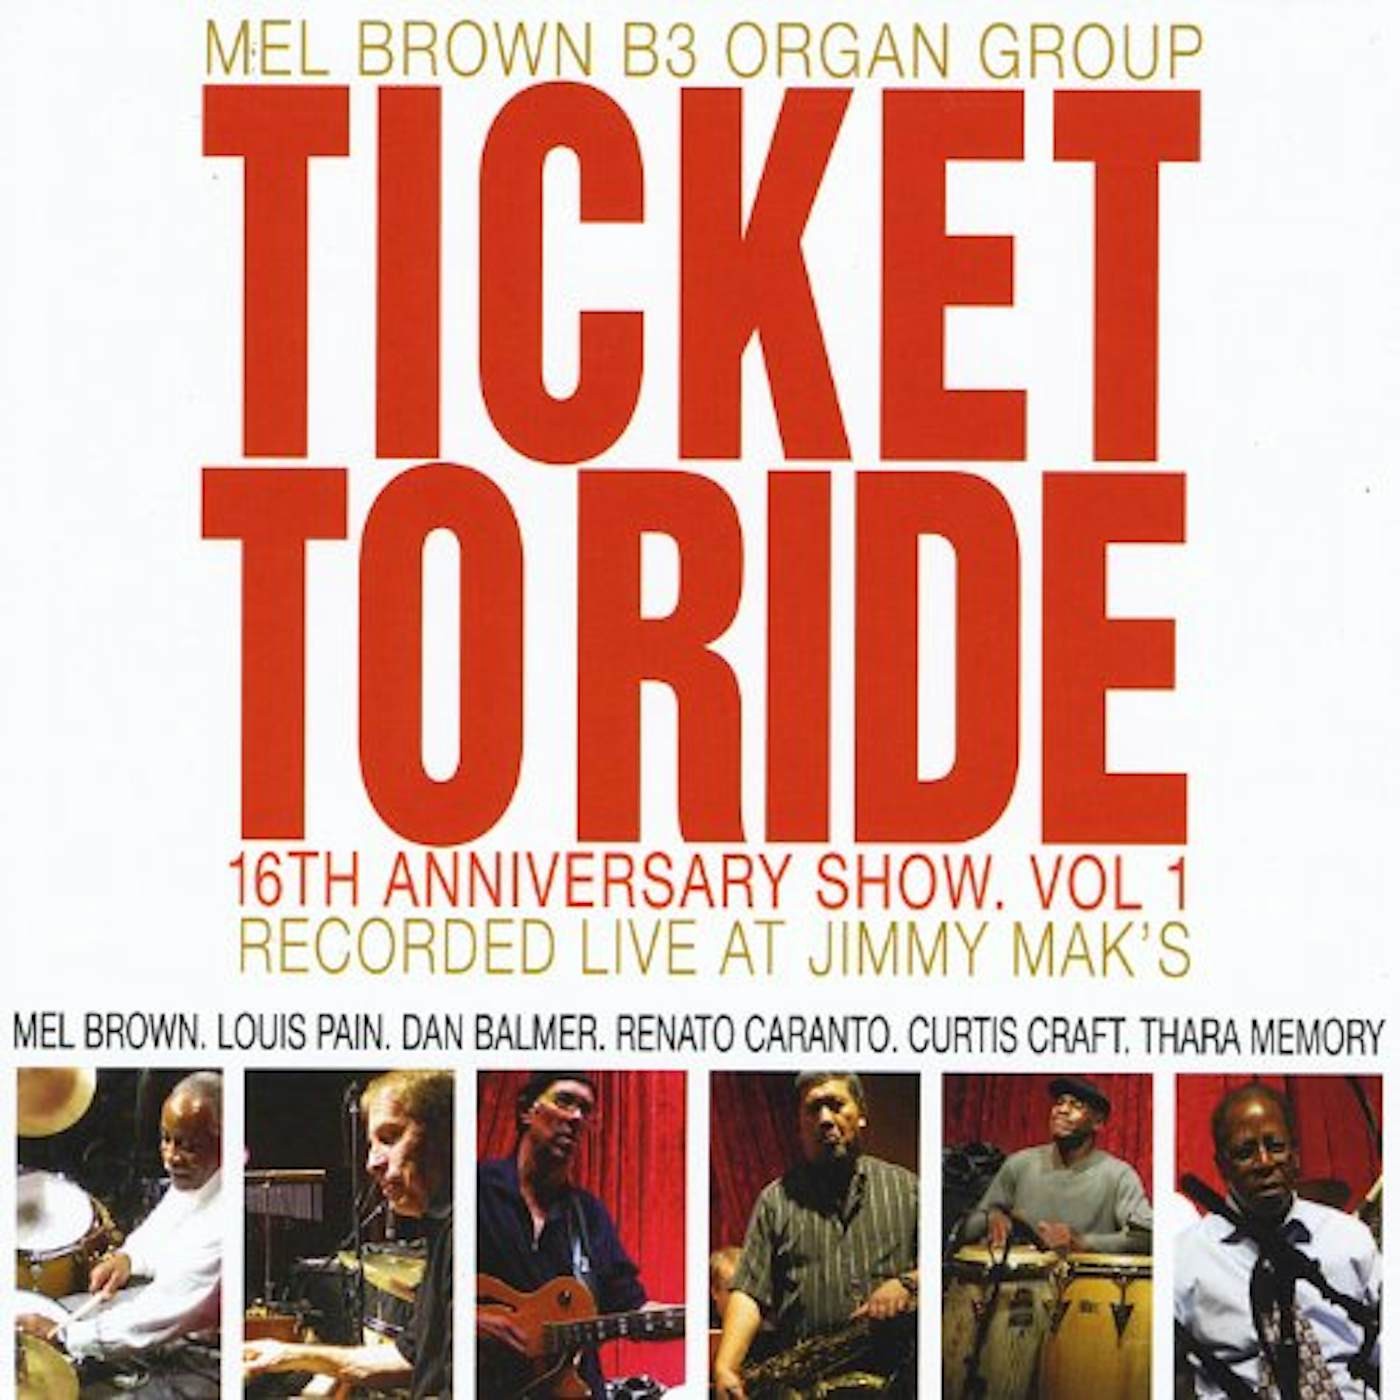 Mel Brown 16TH ANNIVERSARY SHOW 1: TICKET TO RIDE CD